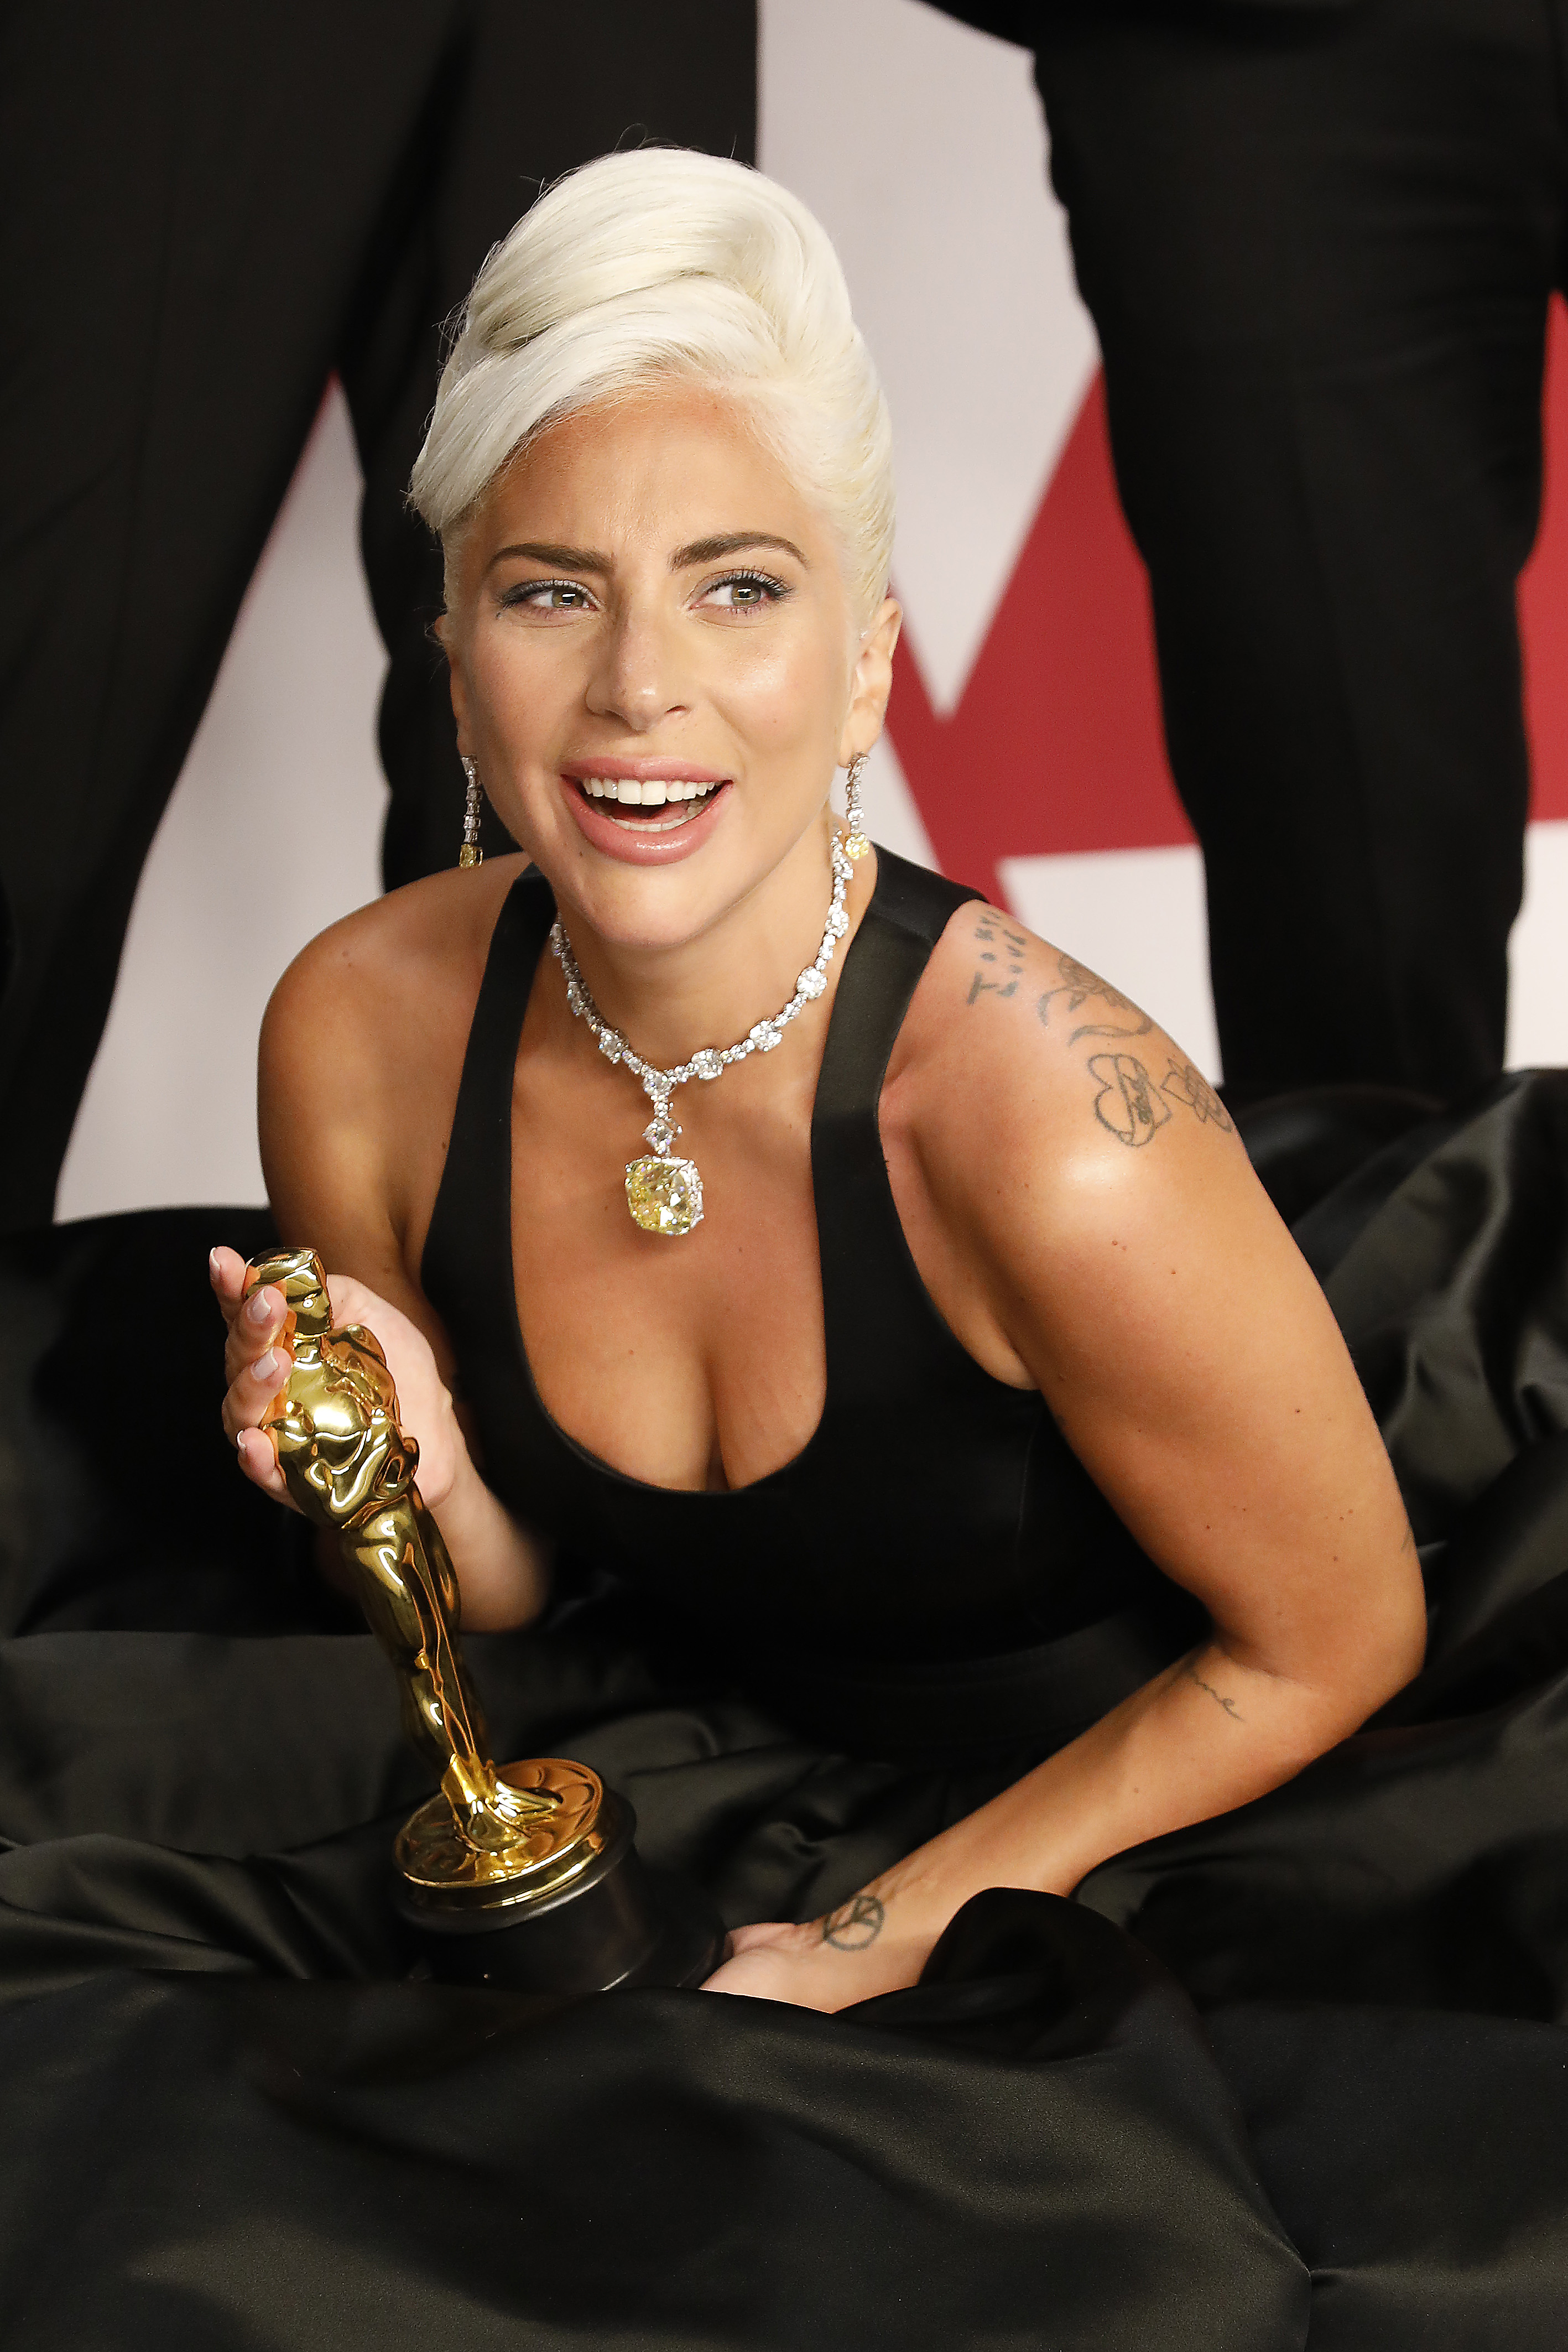 Lady Gaga in a black dress holding an Oscar trophy, smiling, with a necklace